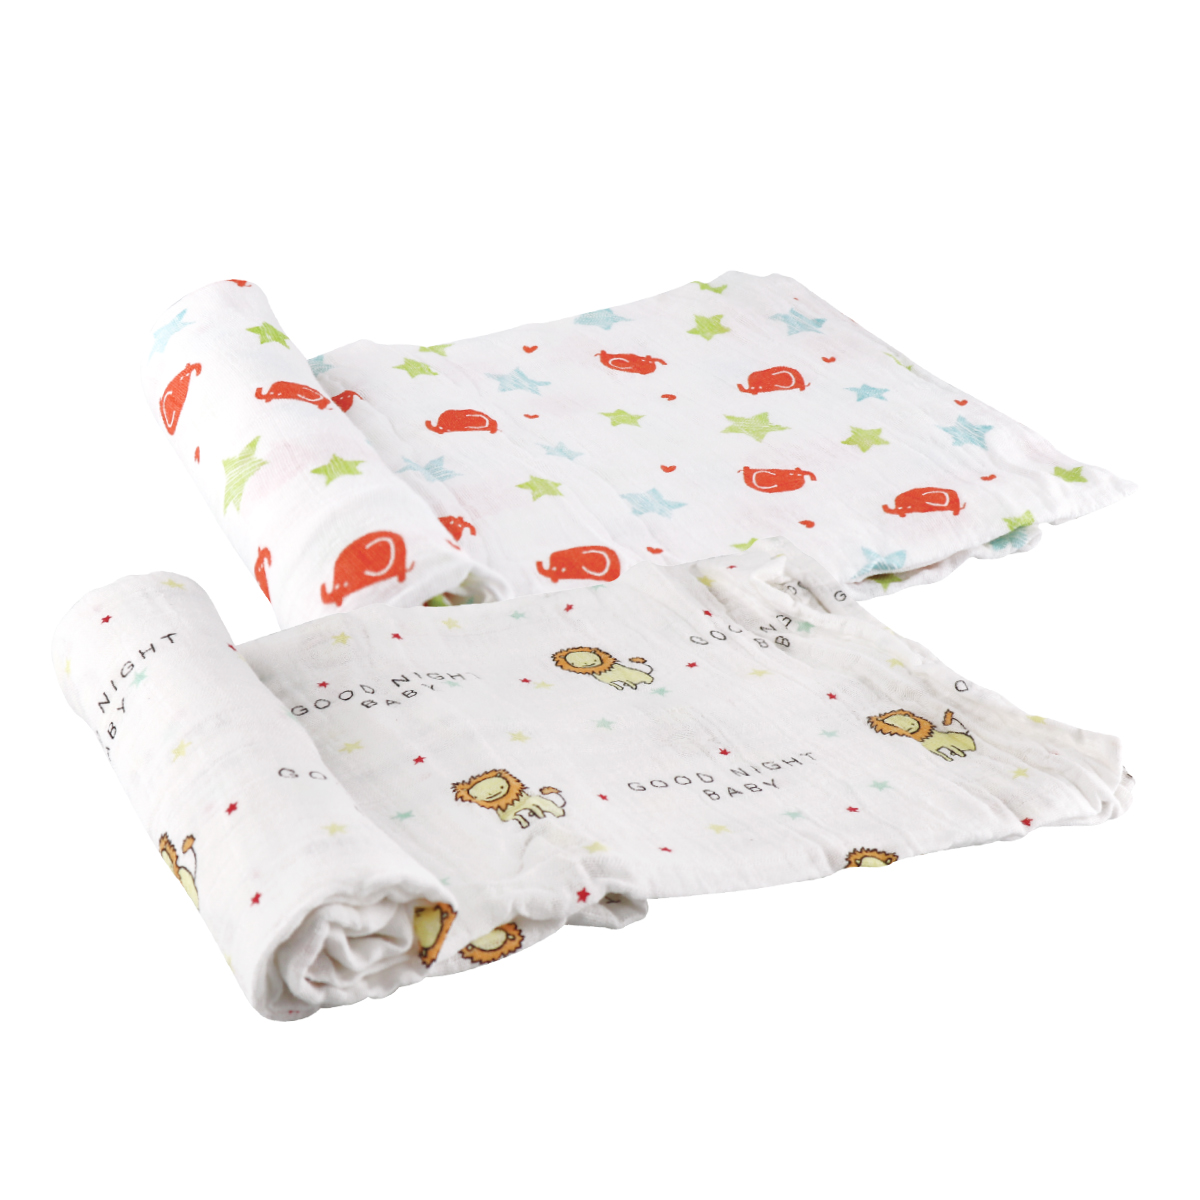 FIFFY SOFT & VENTILATED BABY SWADDLE (2PCS / PACK)